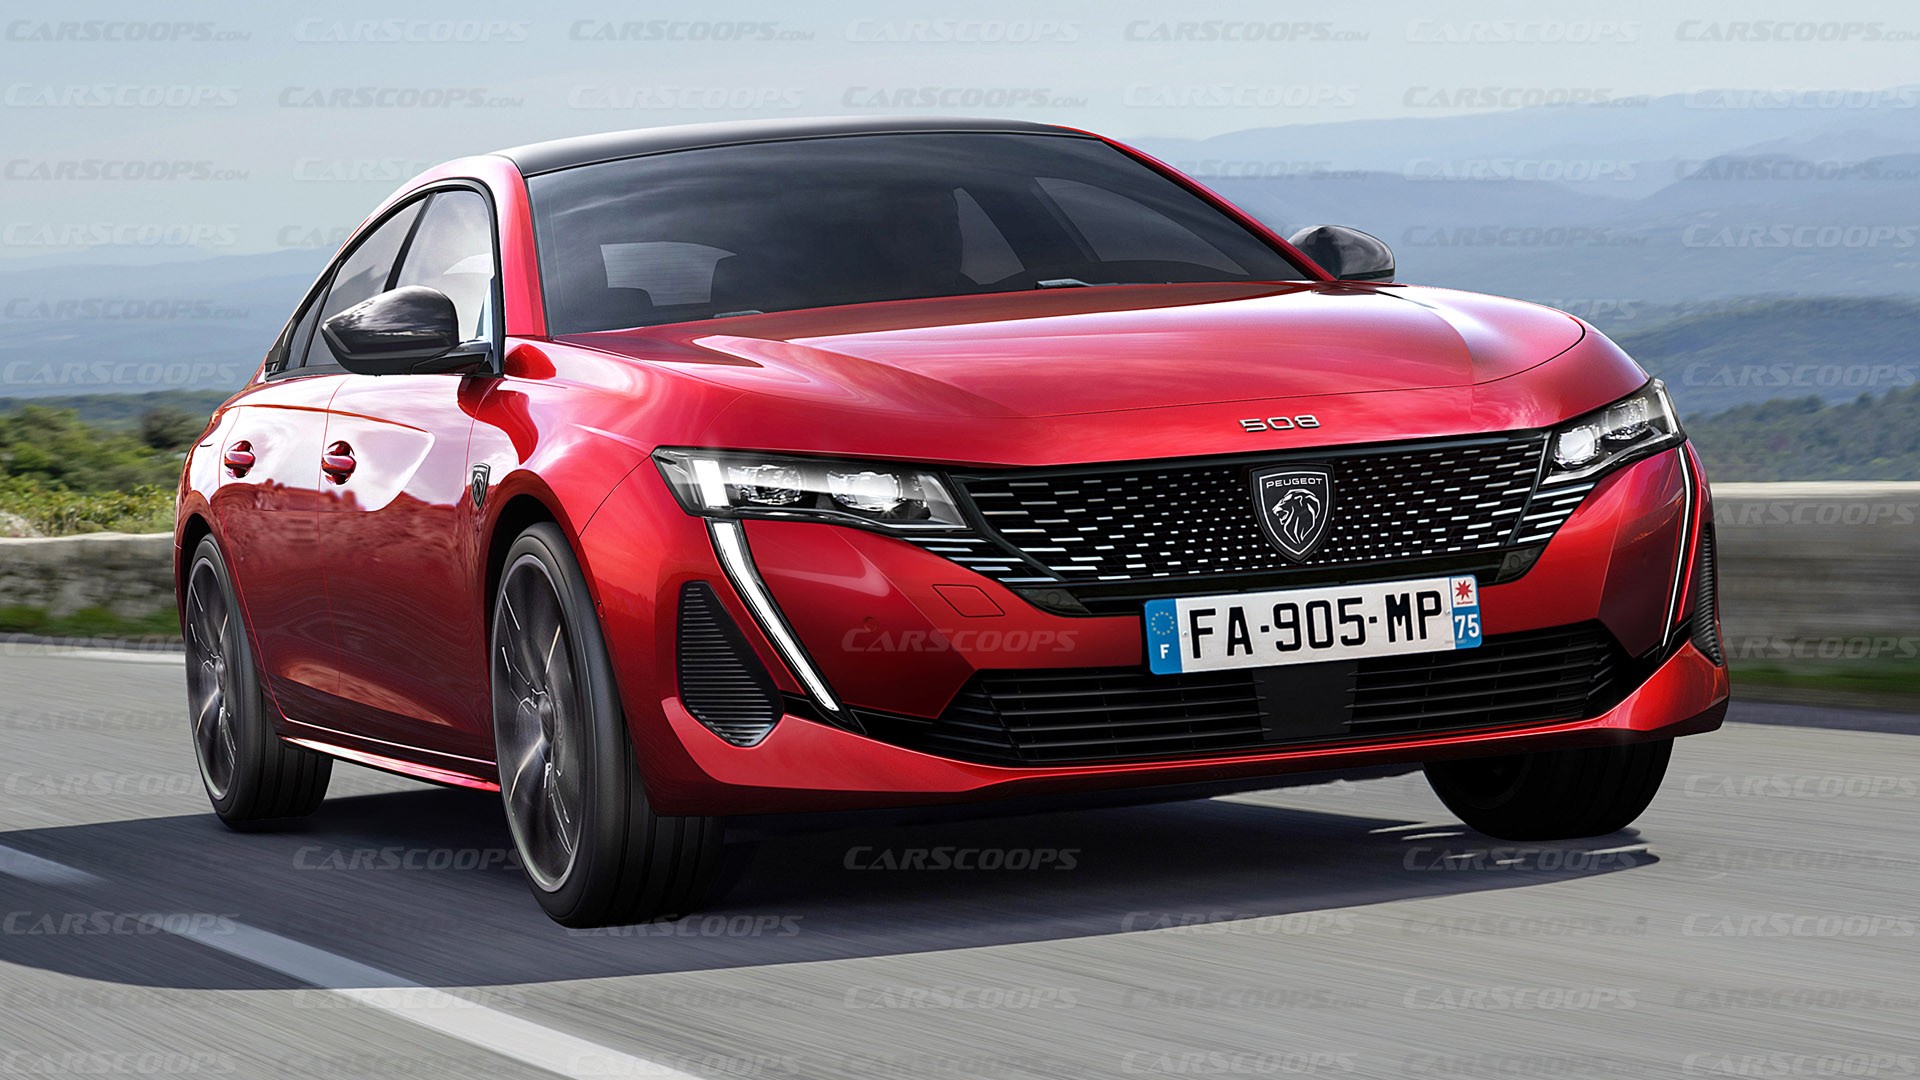 2023 Peugeot 508: Here's What We Know And What To Expect From The